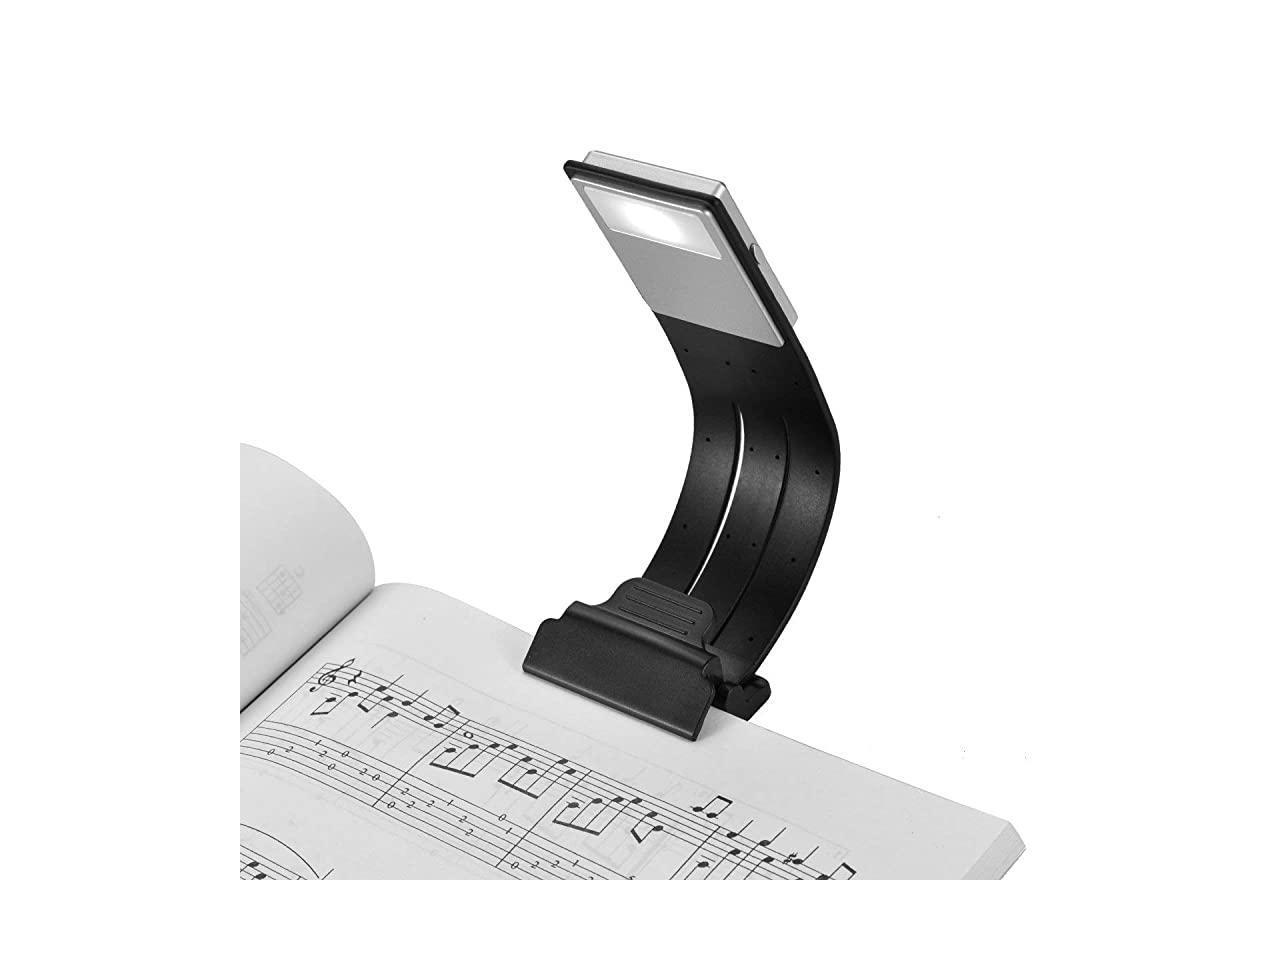 Warm White & White in 1 Reading Light Flexible Clip Reading Lamp in Bed and Portable Travel Book Light Music Stand Light Night Lights for Kids 14 LED USB Rechargeable and Eye-Care Book Light 